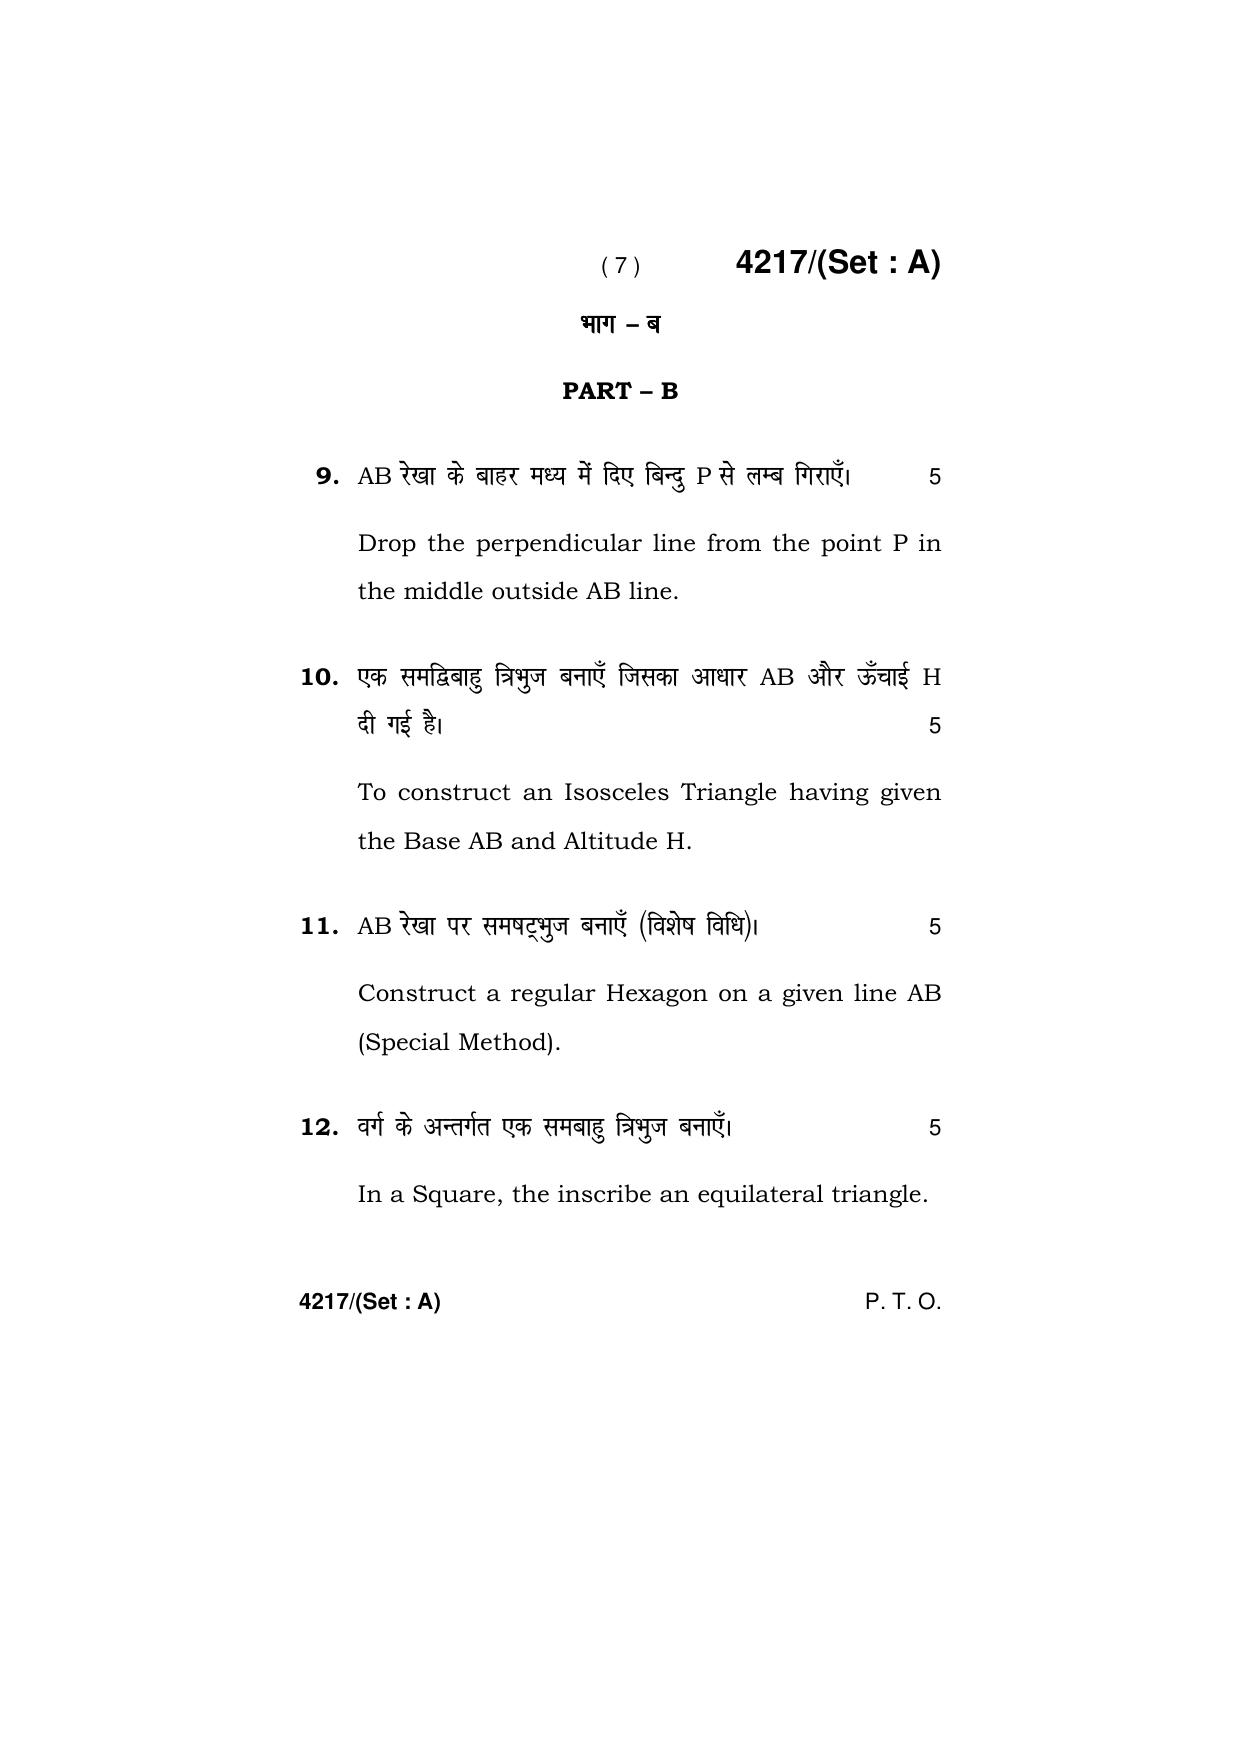 Haryana Board HBSE Class 10 Drawing (All Set) 2019 Question Paper - Page 7